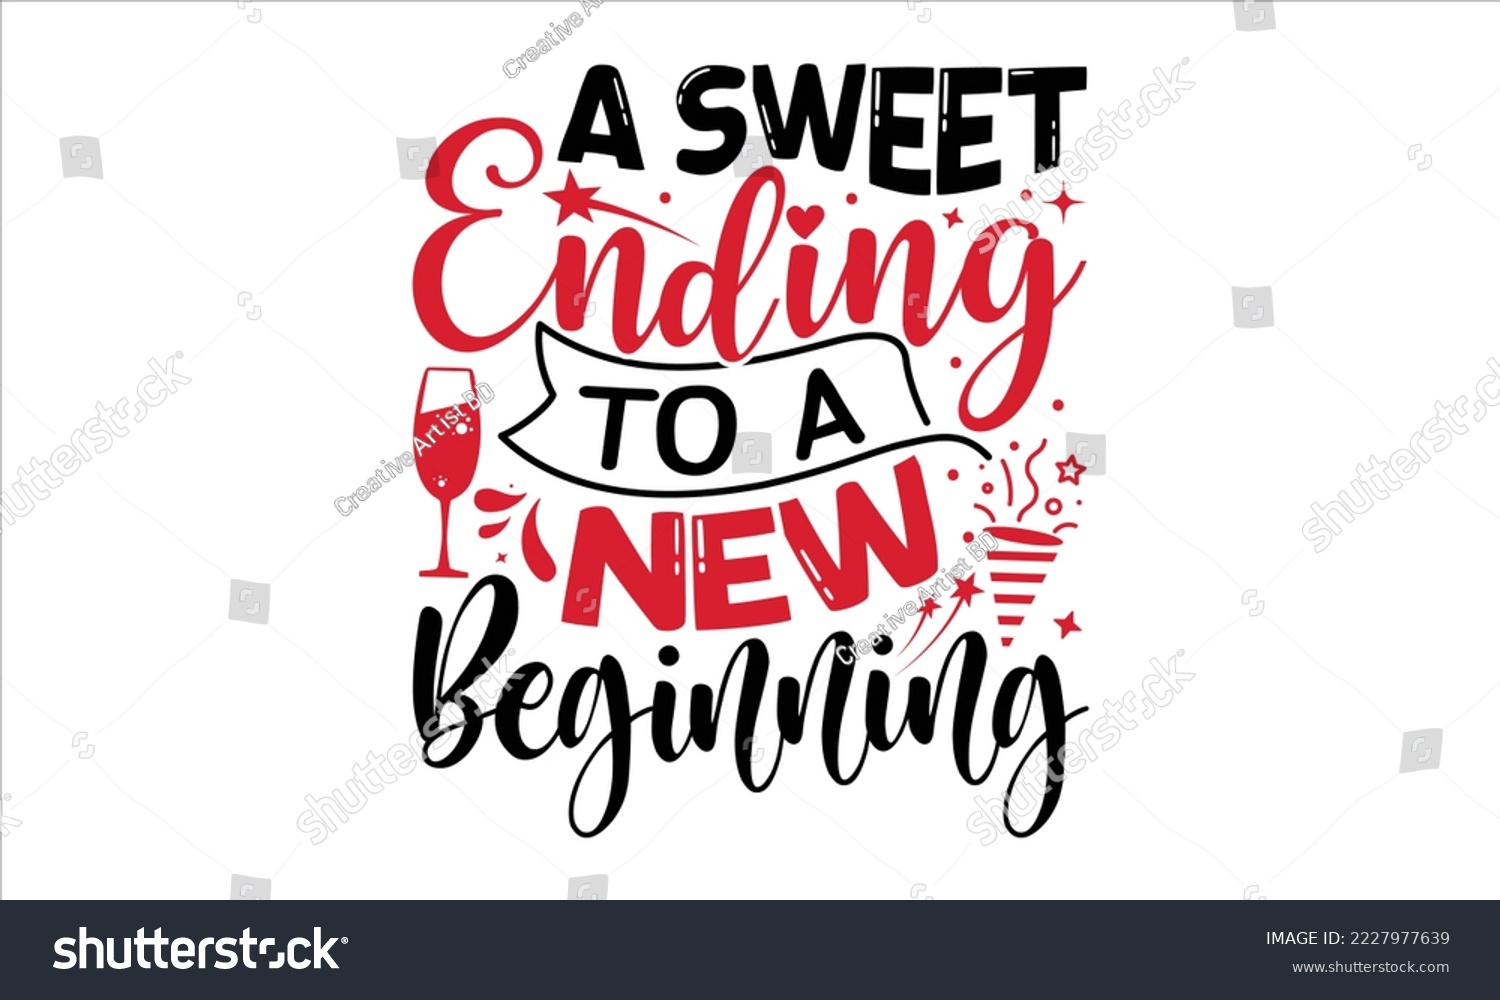 SVG of A Sweet Ending To A New Beginning  - Happy New Year  T shirt Design, Modern calligraphy, Cut Files for Cricut Svg, Illustration for prints on bags, posters svg